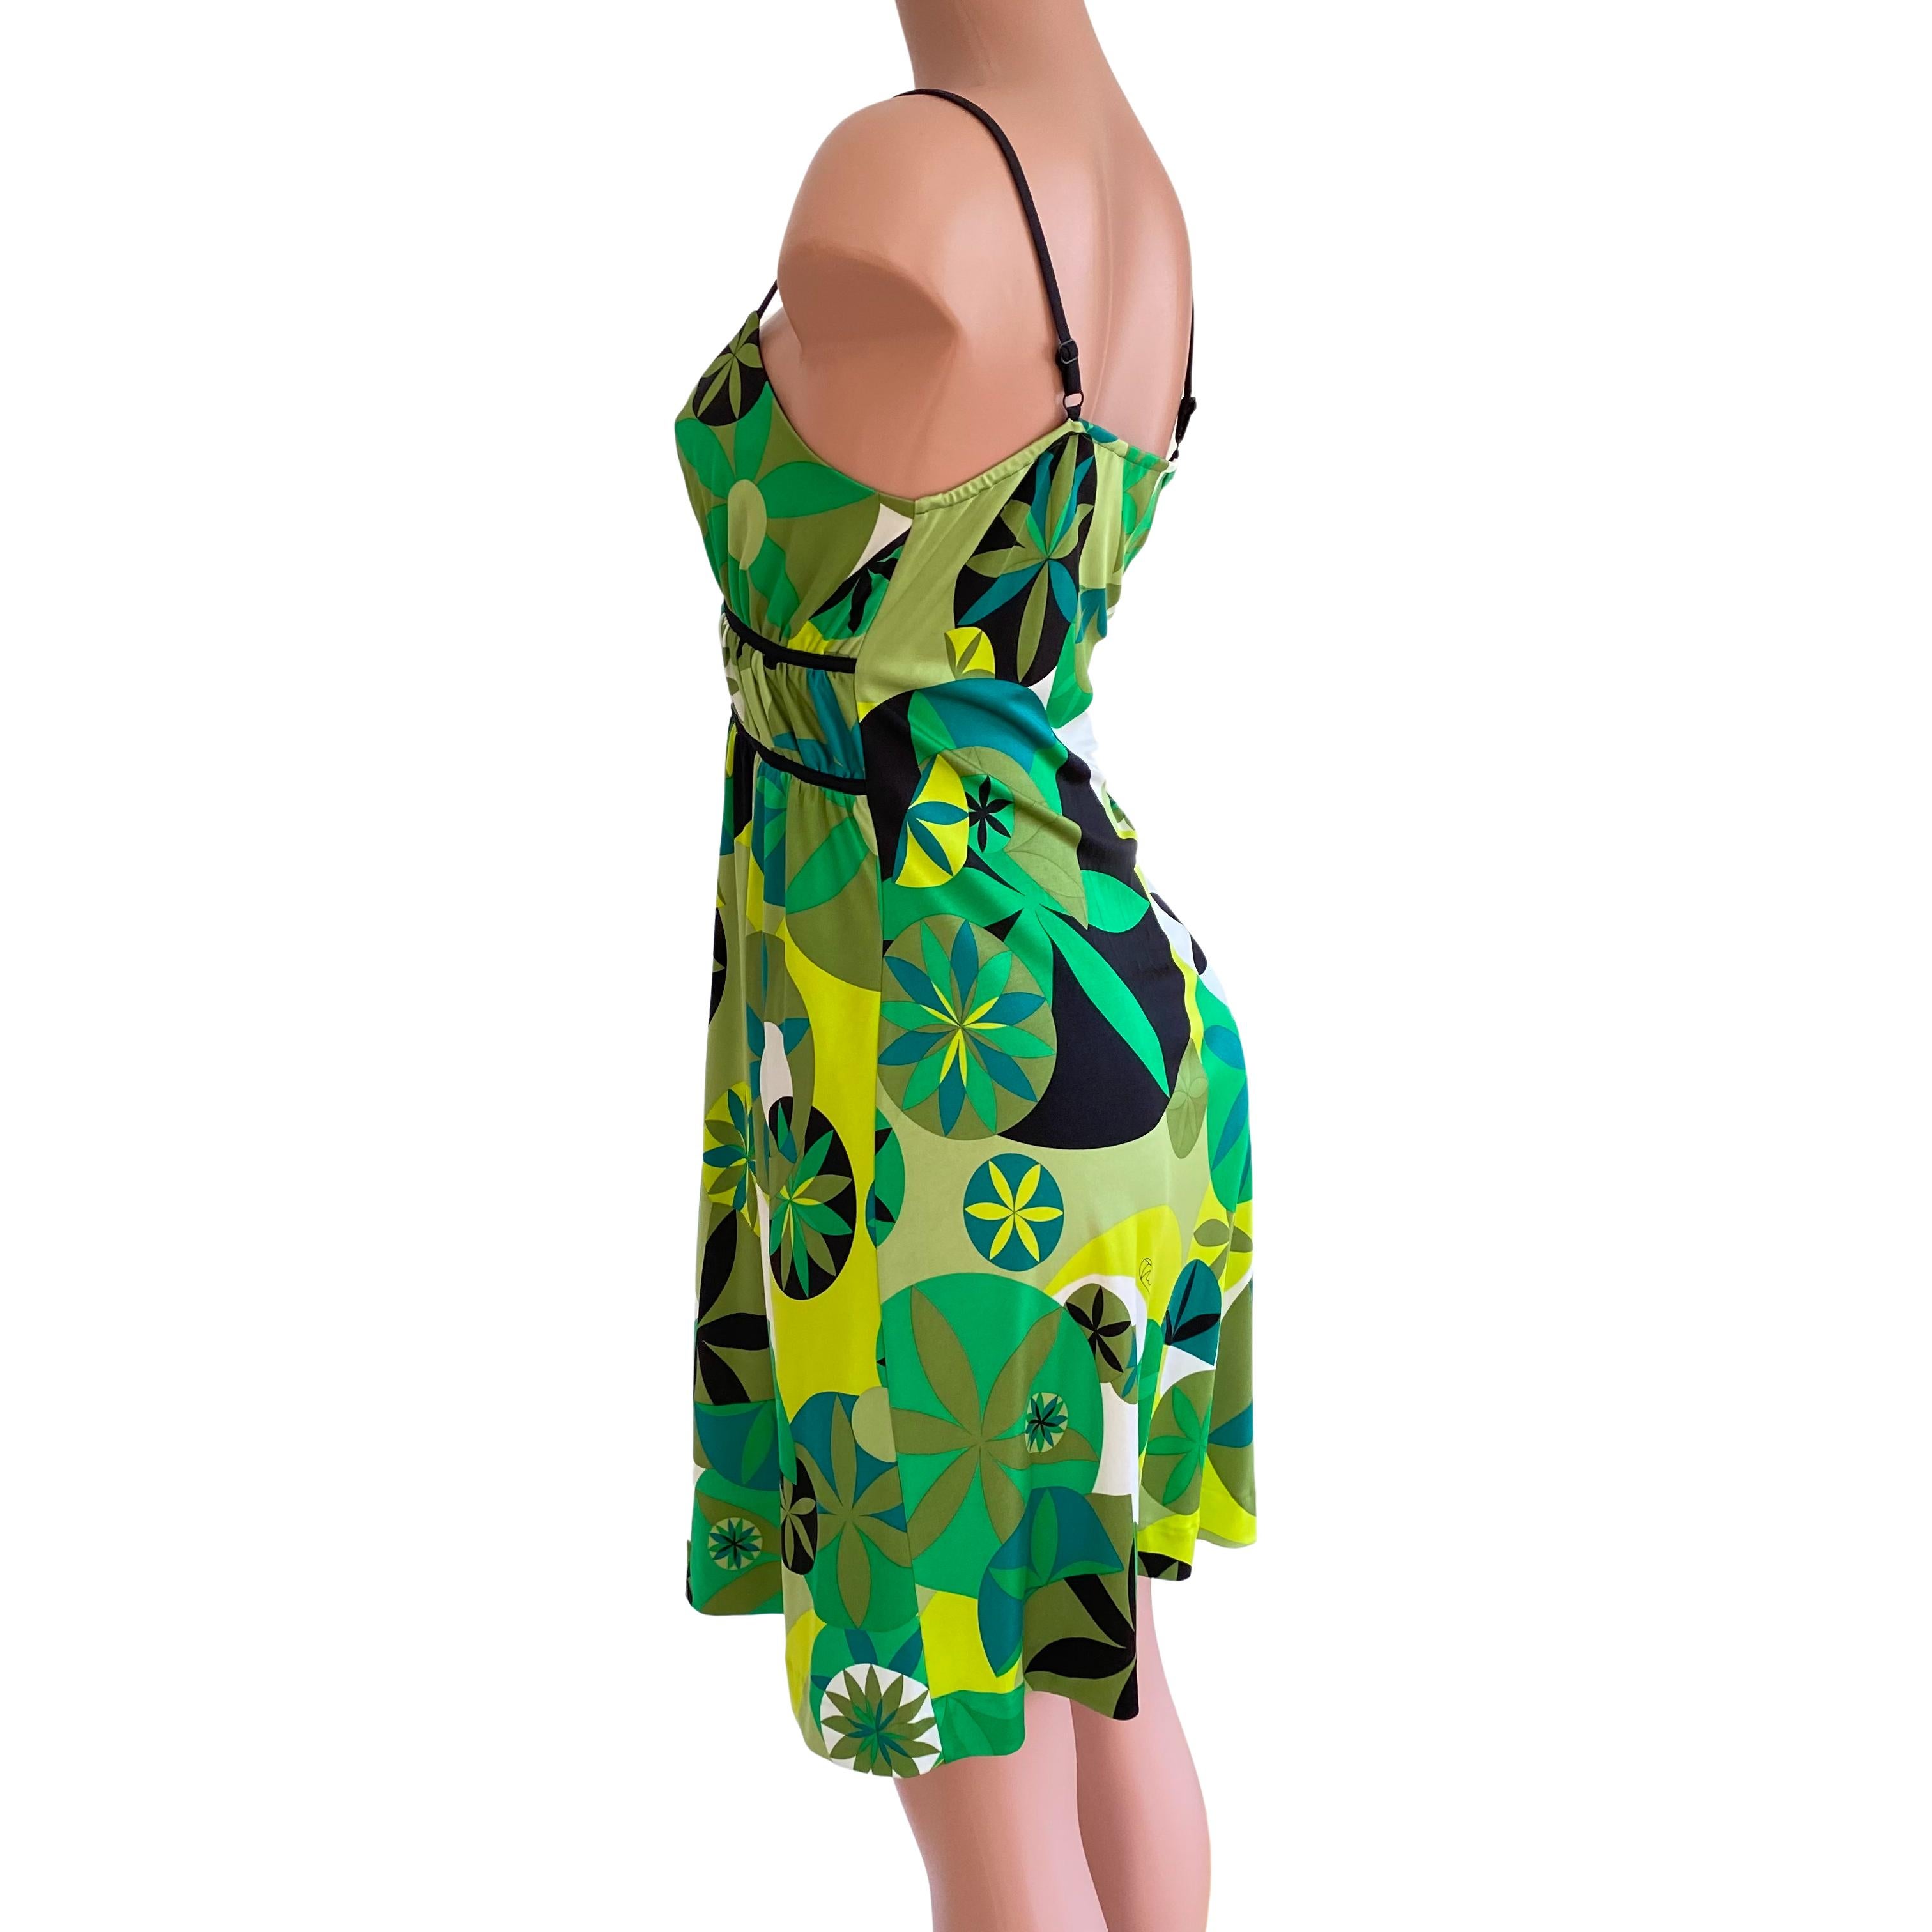 Hand-designed lily pond print in various shades of green.
Easy, flattering pull-over silk jersey slip dress with deep plunge V and lots of volume in the skirt.
Lined bra top. Adjustable shoulder straps for a perfect fit.
Roll it up for travel, wear